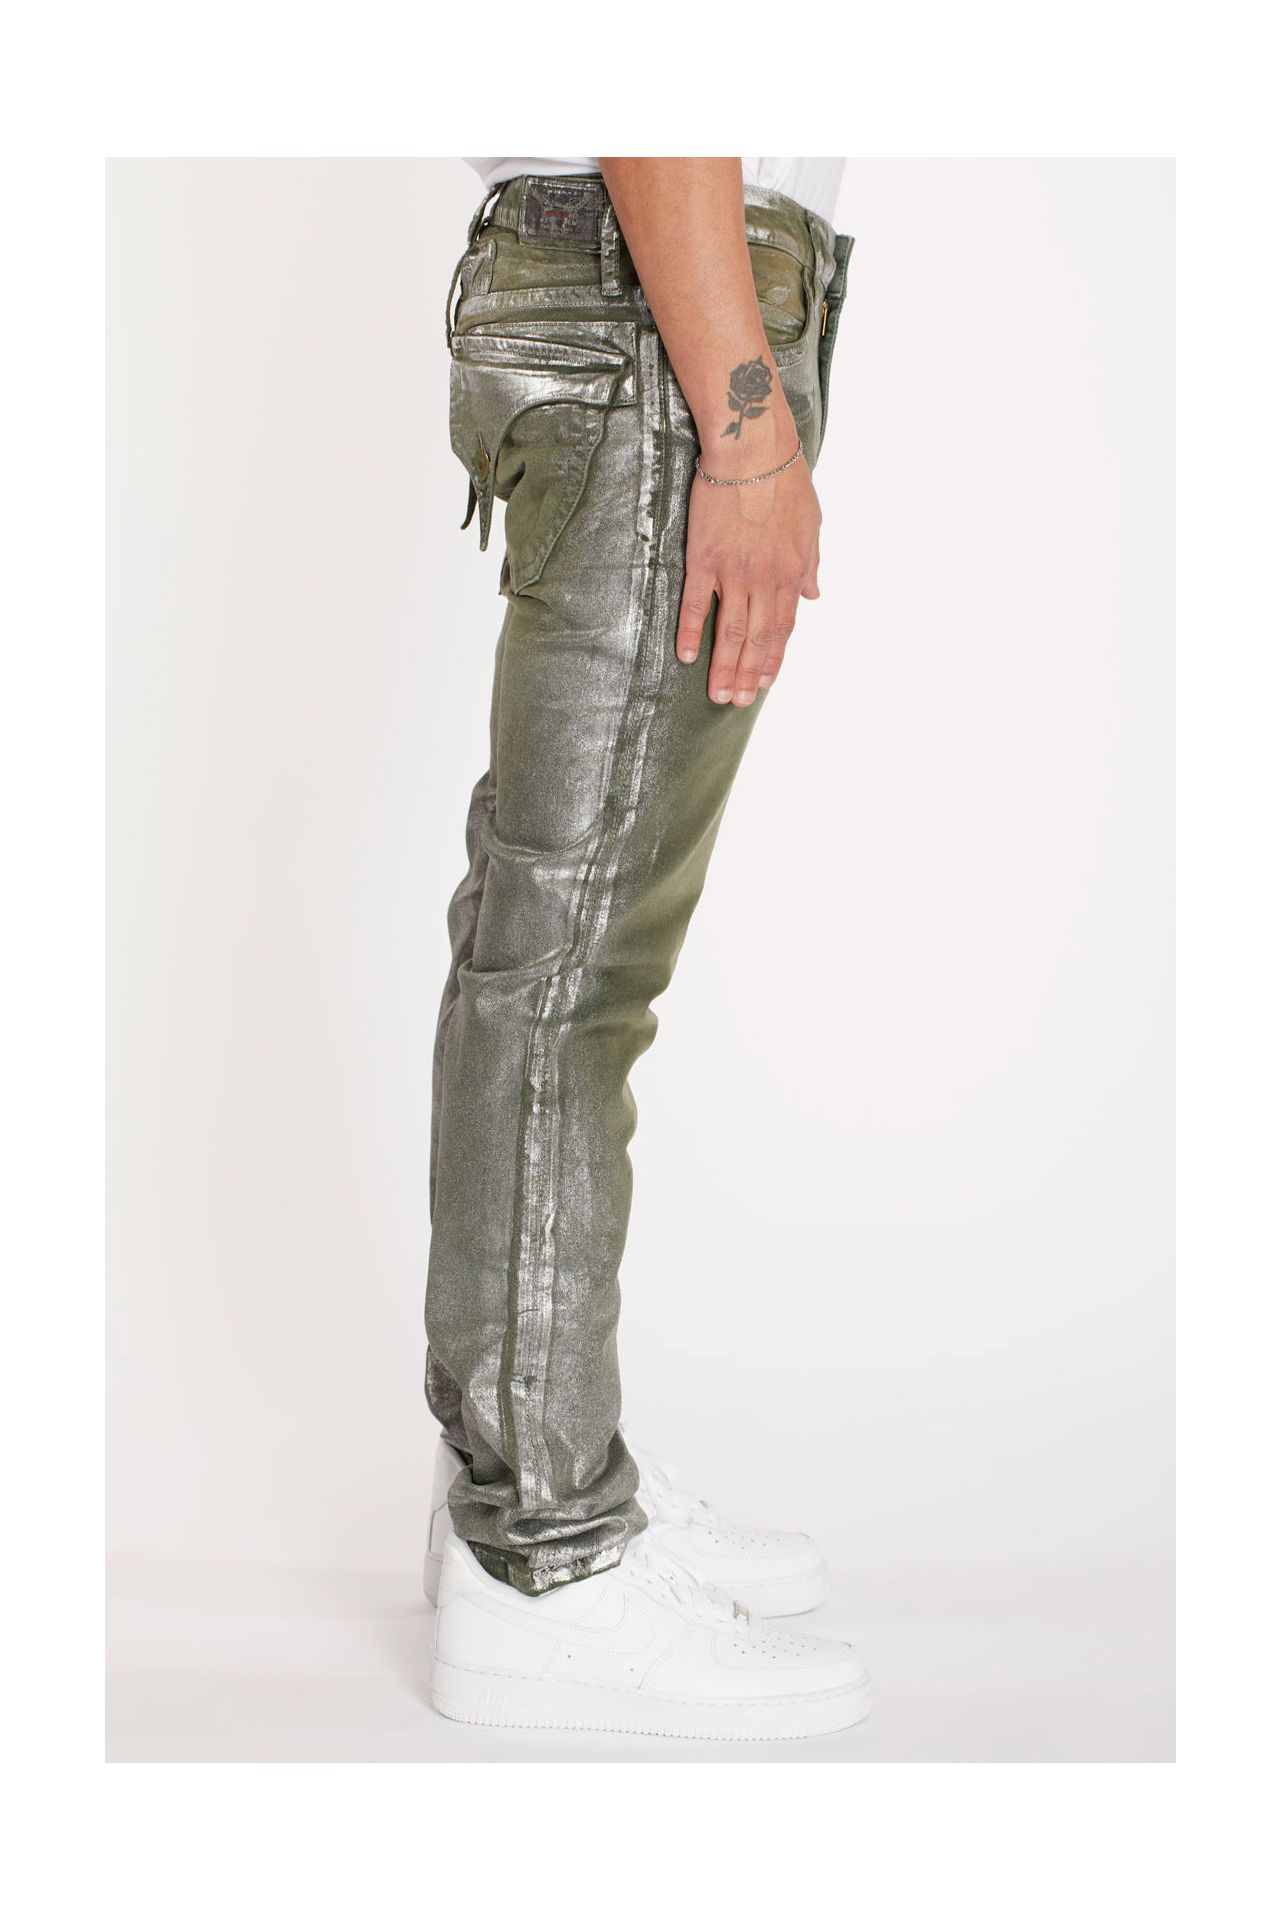 LONG FLAP SLIM FIT MENS JEANS IN OLIVE AND SILVER